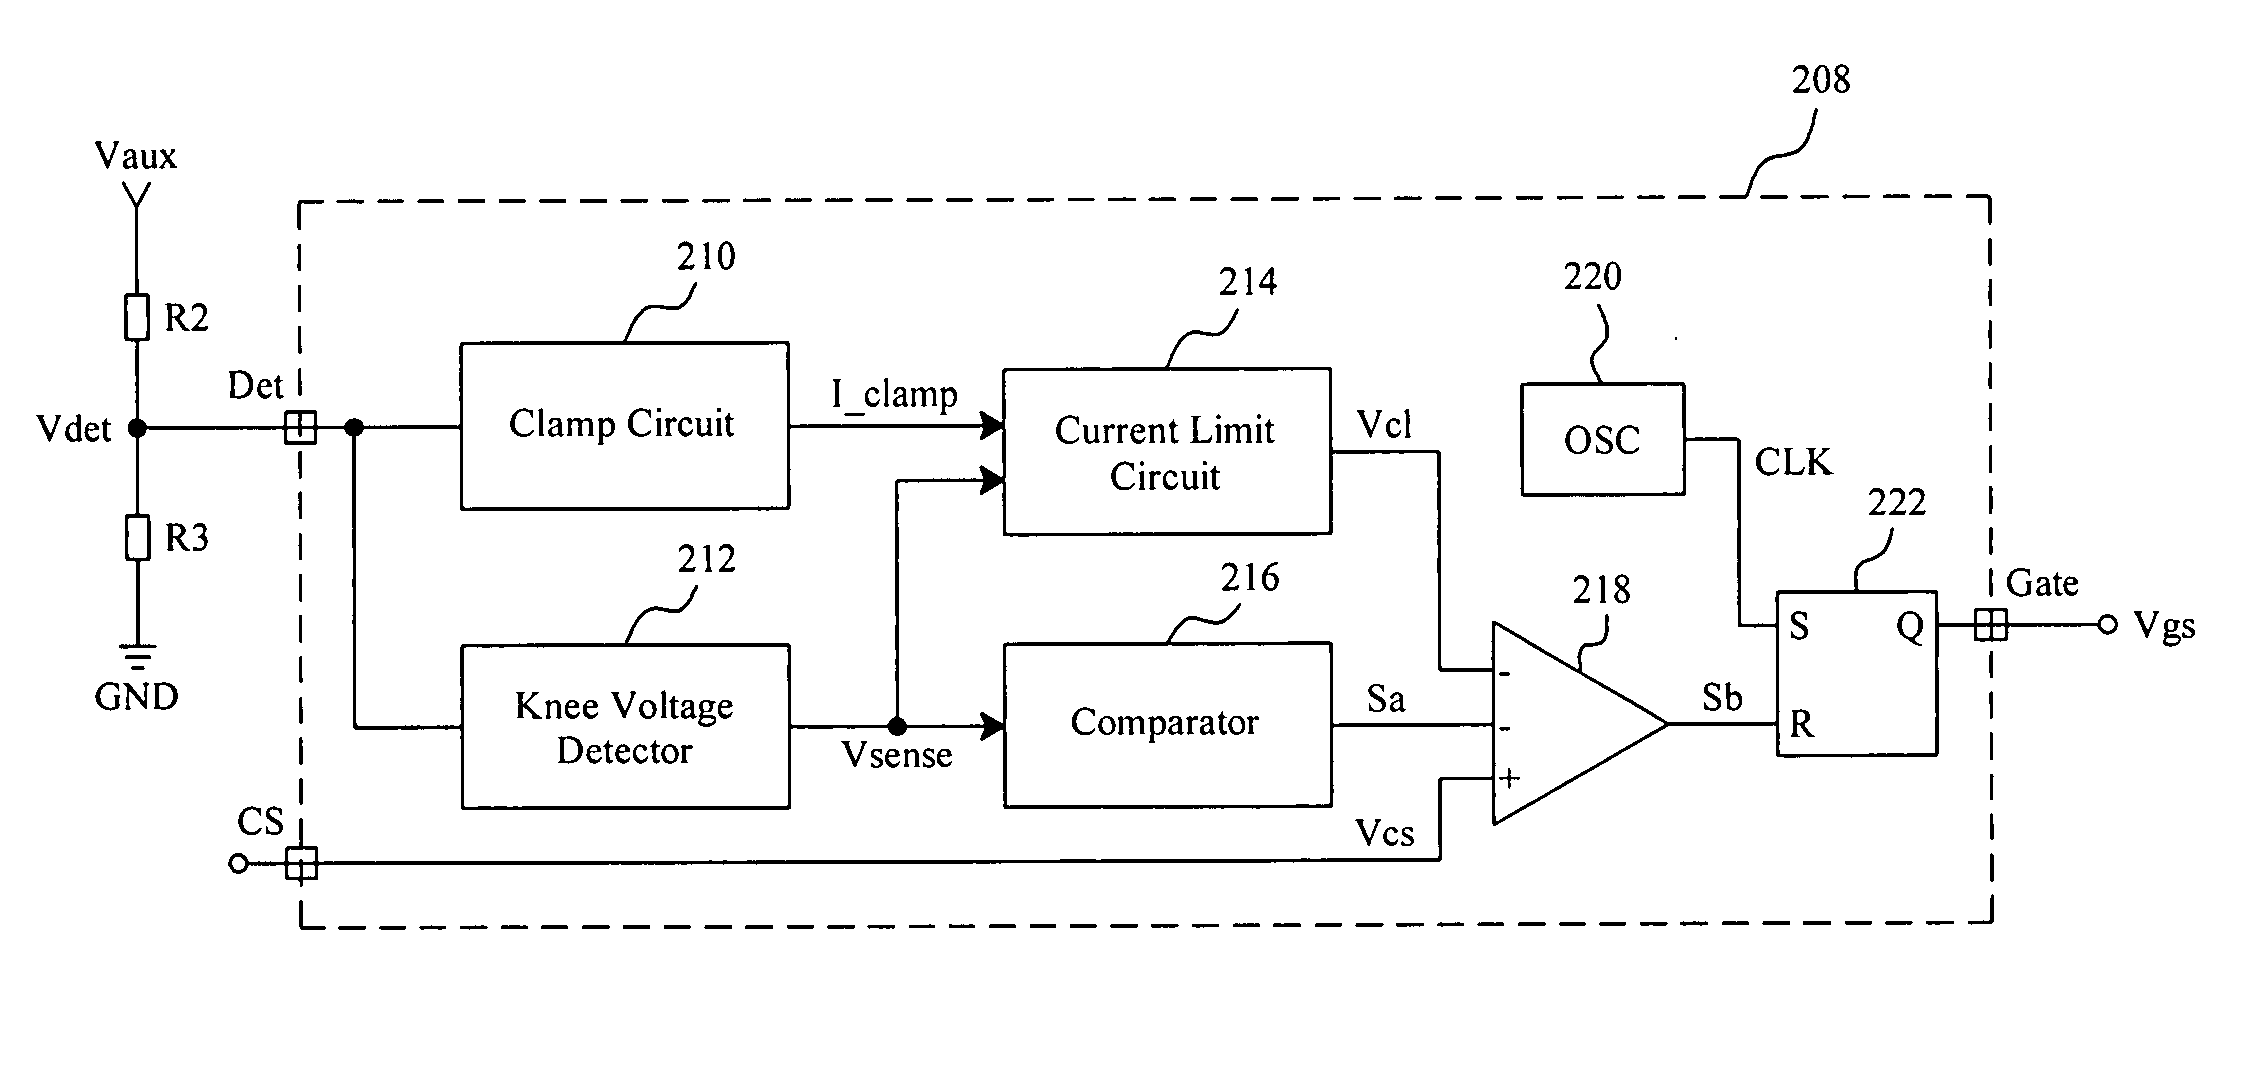 Apparatus and method for regulating constant output voltage and current on primary side in a flyback converter